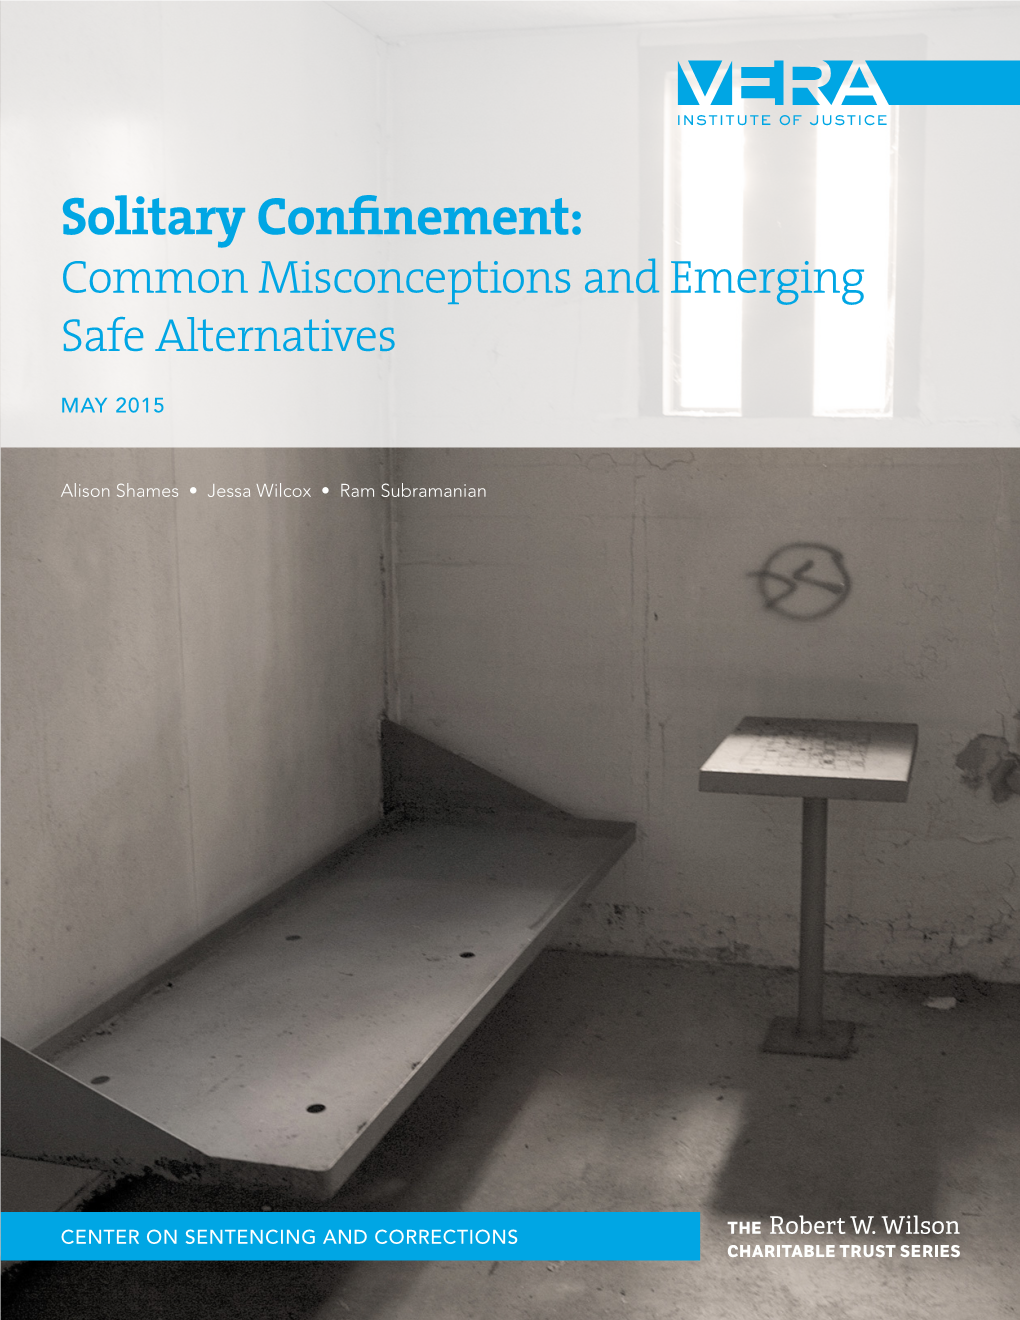 Solitary Confinement: Common Misconceptions and Emerging Safe Alternatives